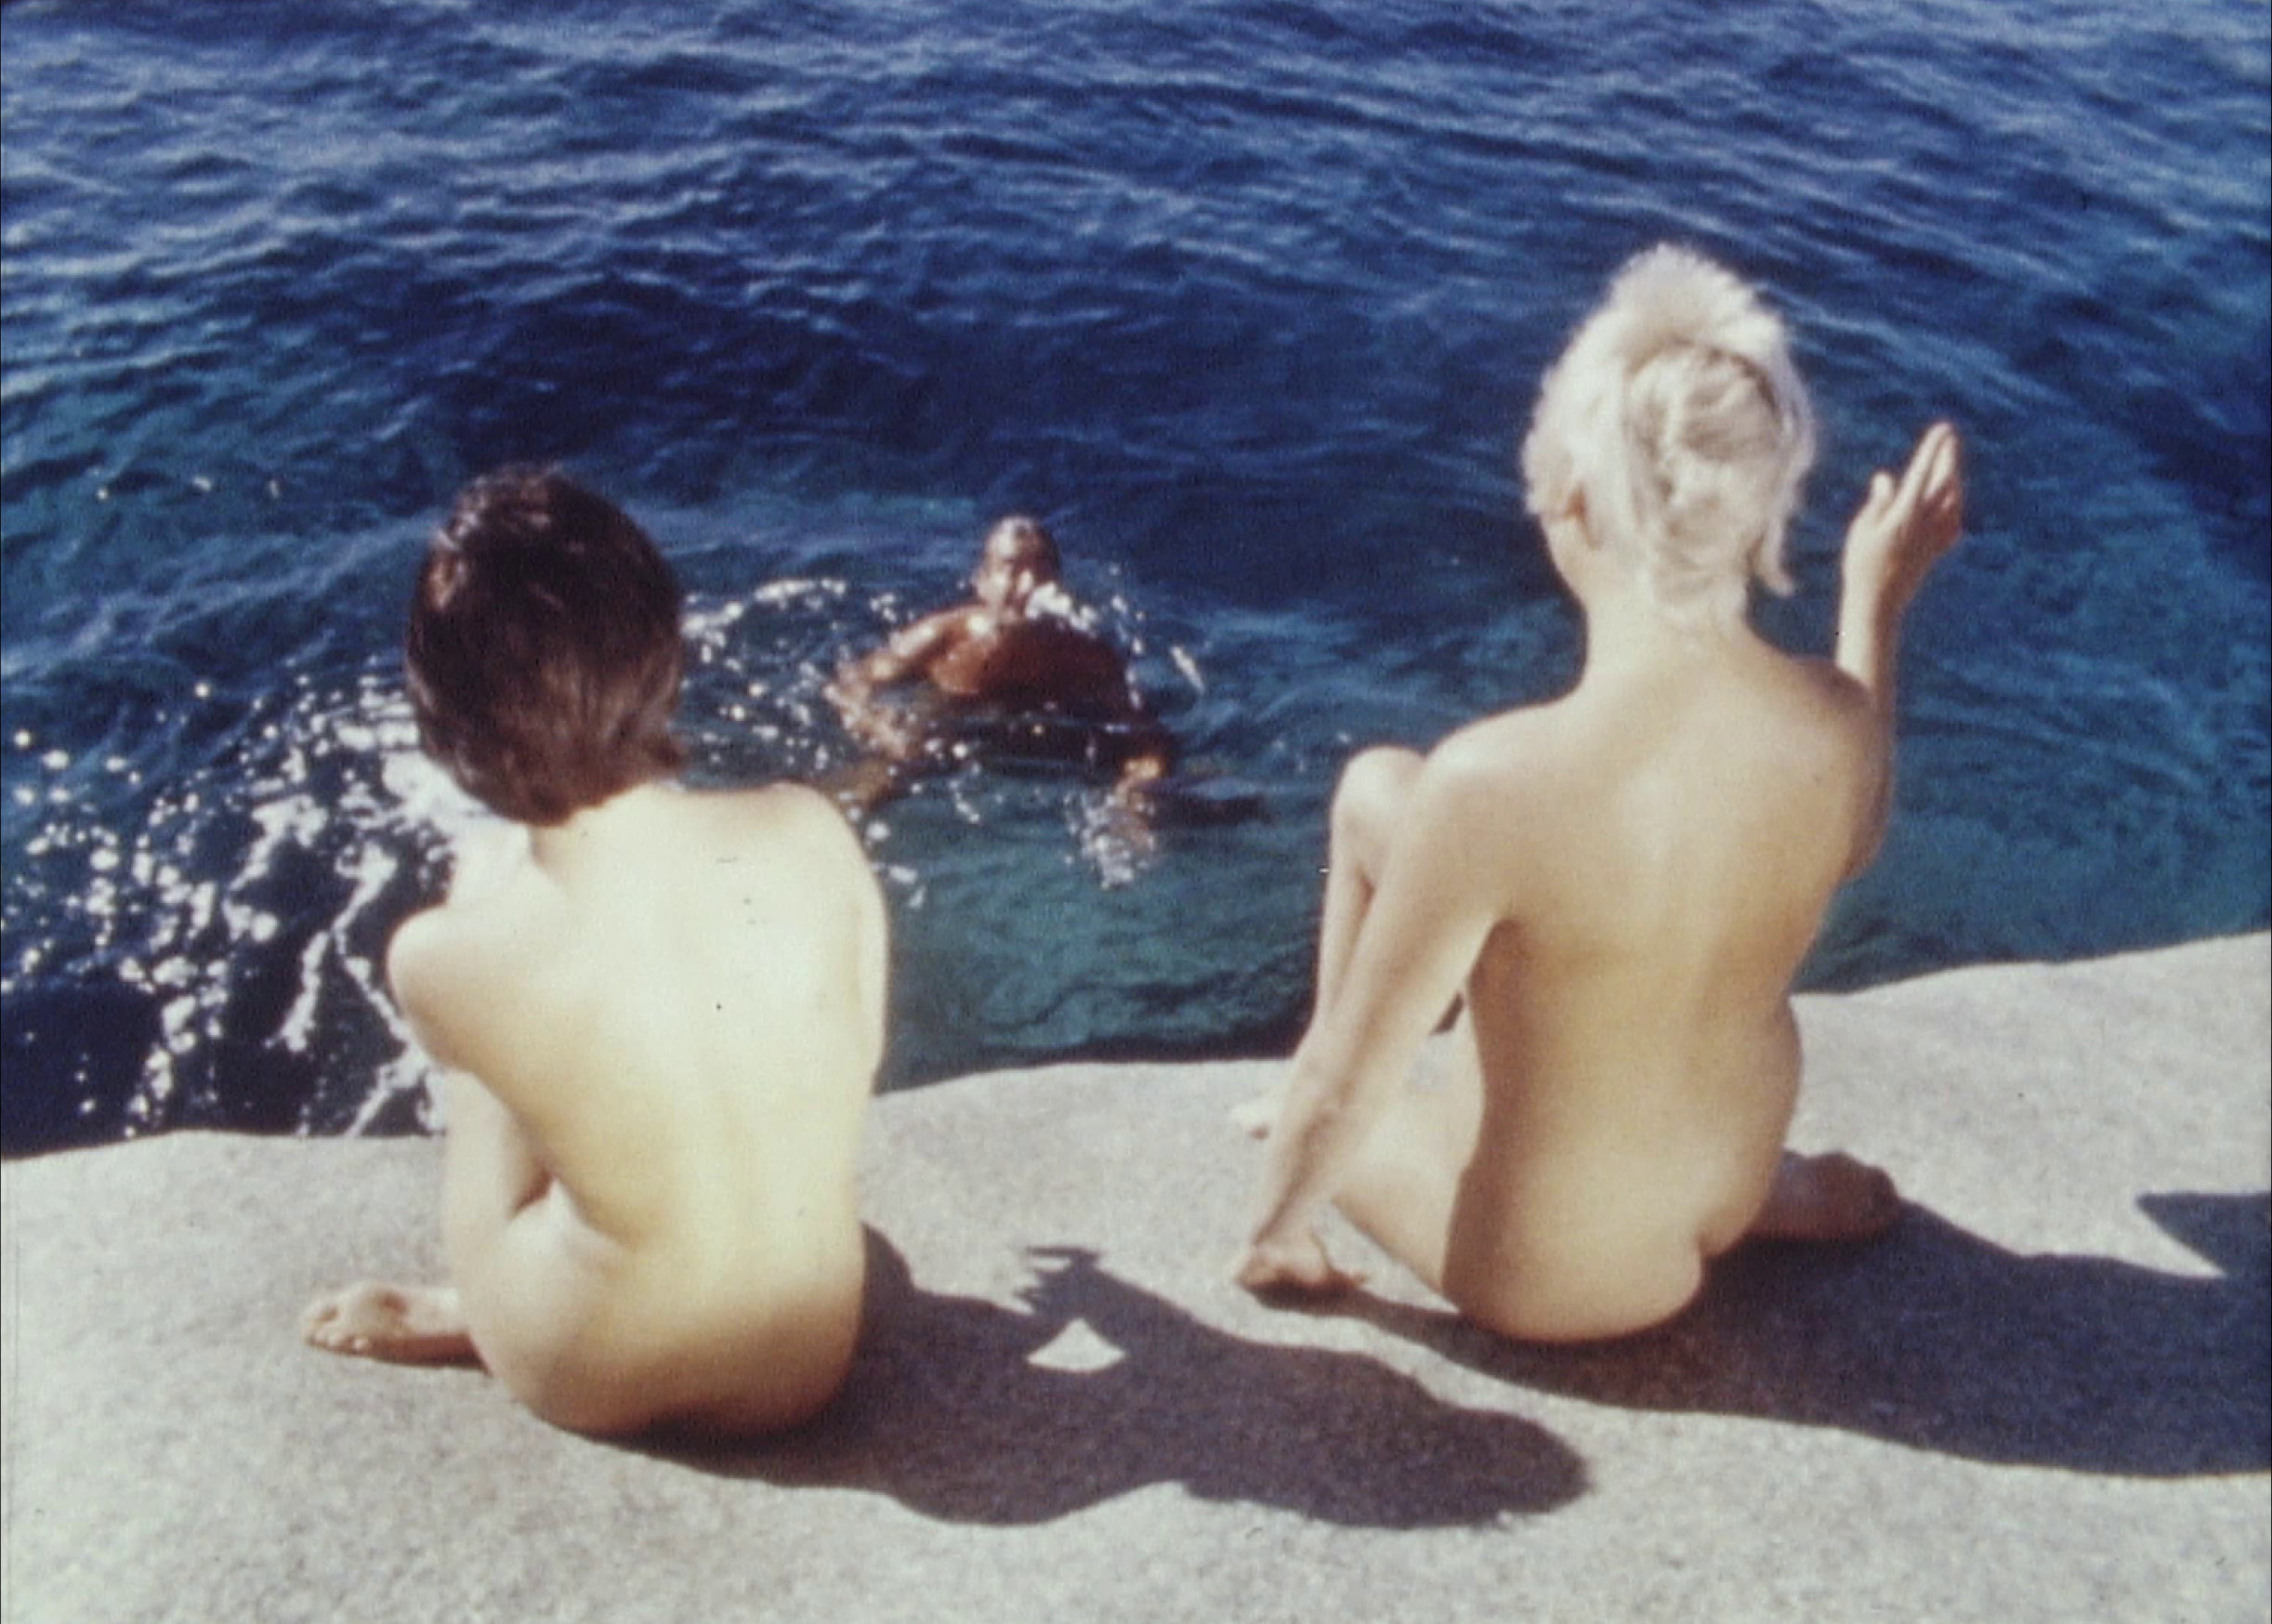 Sun-drenched nudist films from the 50s and image